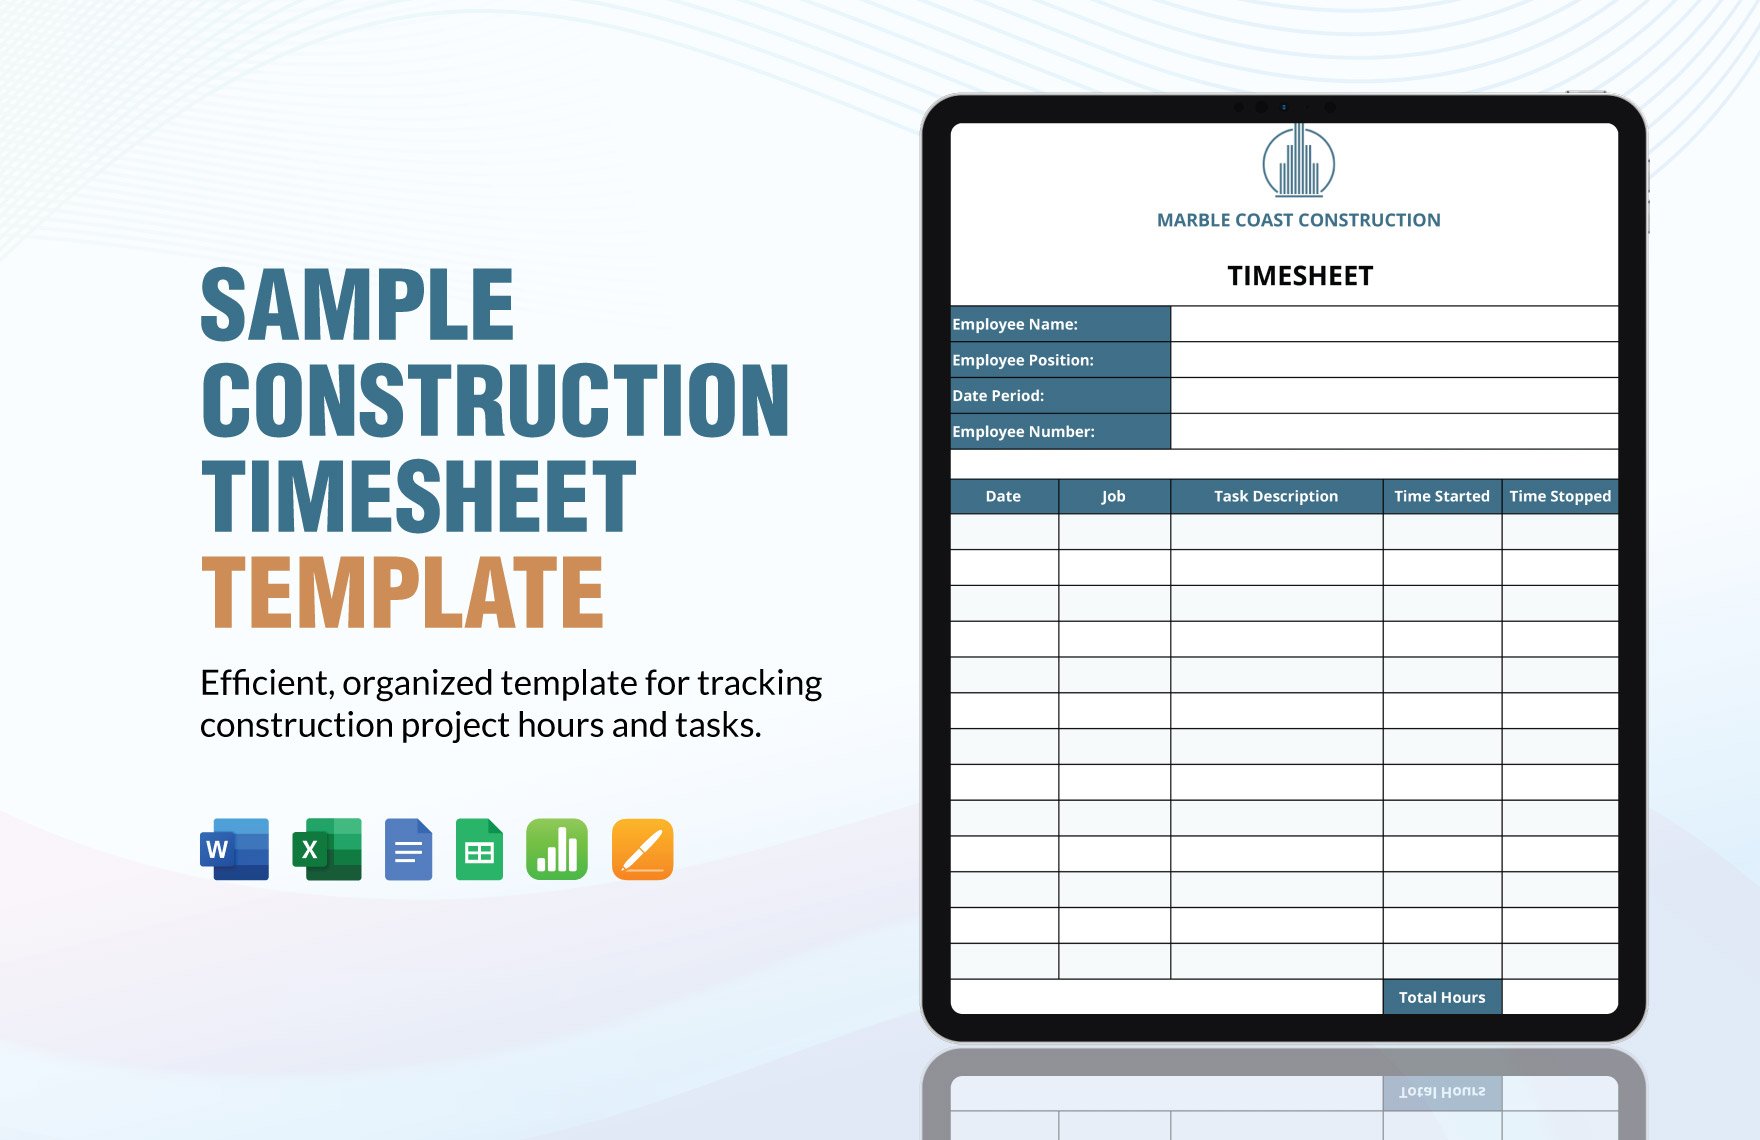 Sample Construction Timesheet Template in Word, Google Docs, Excel, Google Sheets, Apple Pages, Apple Numbers